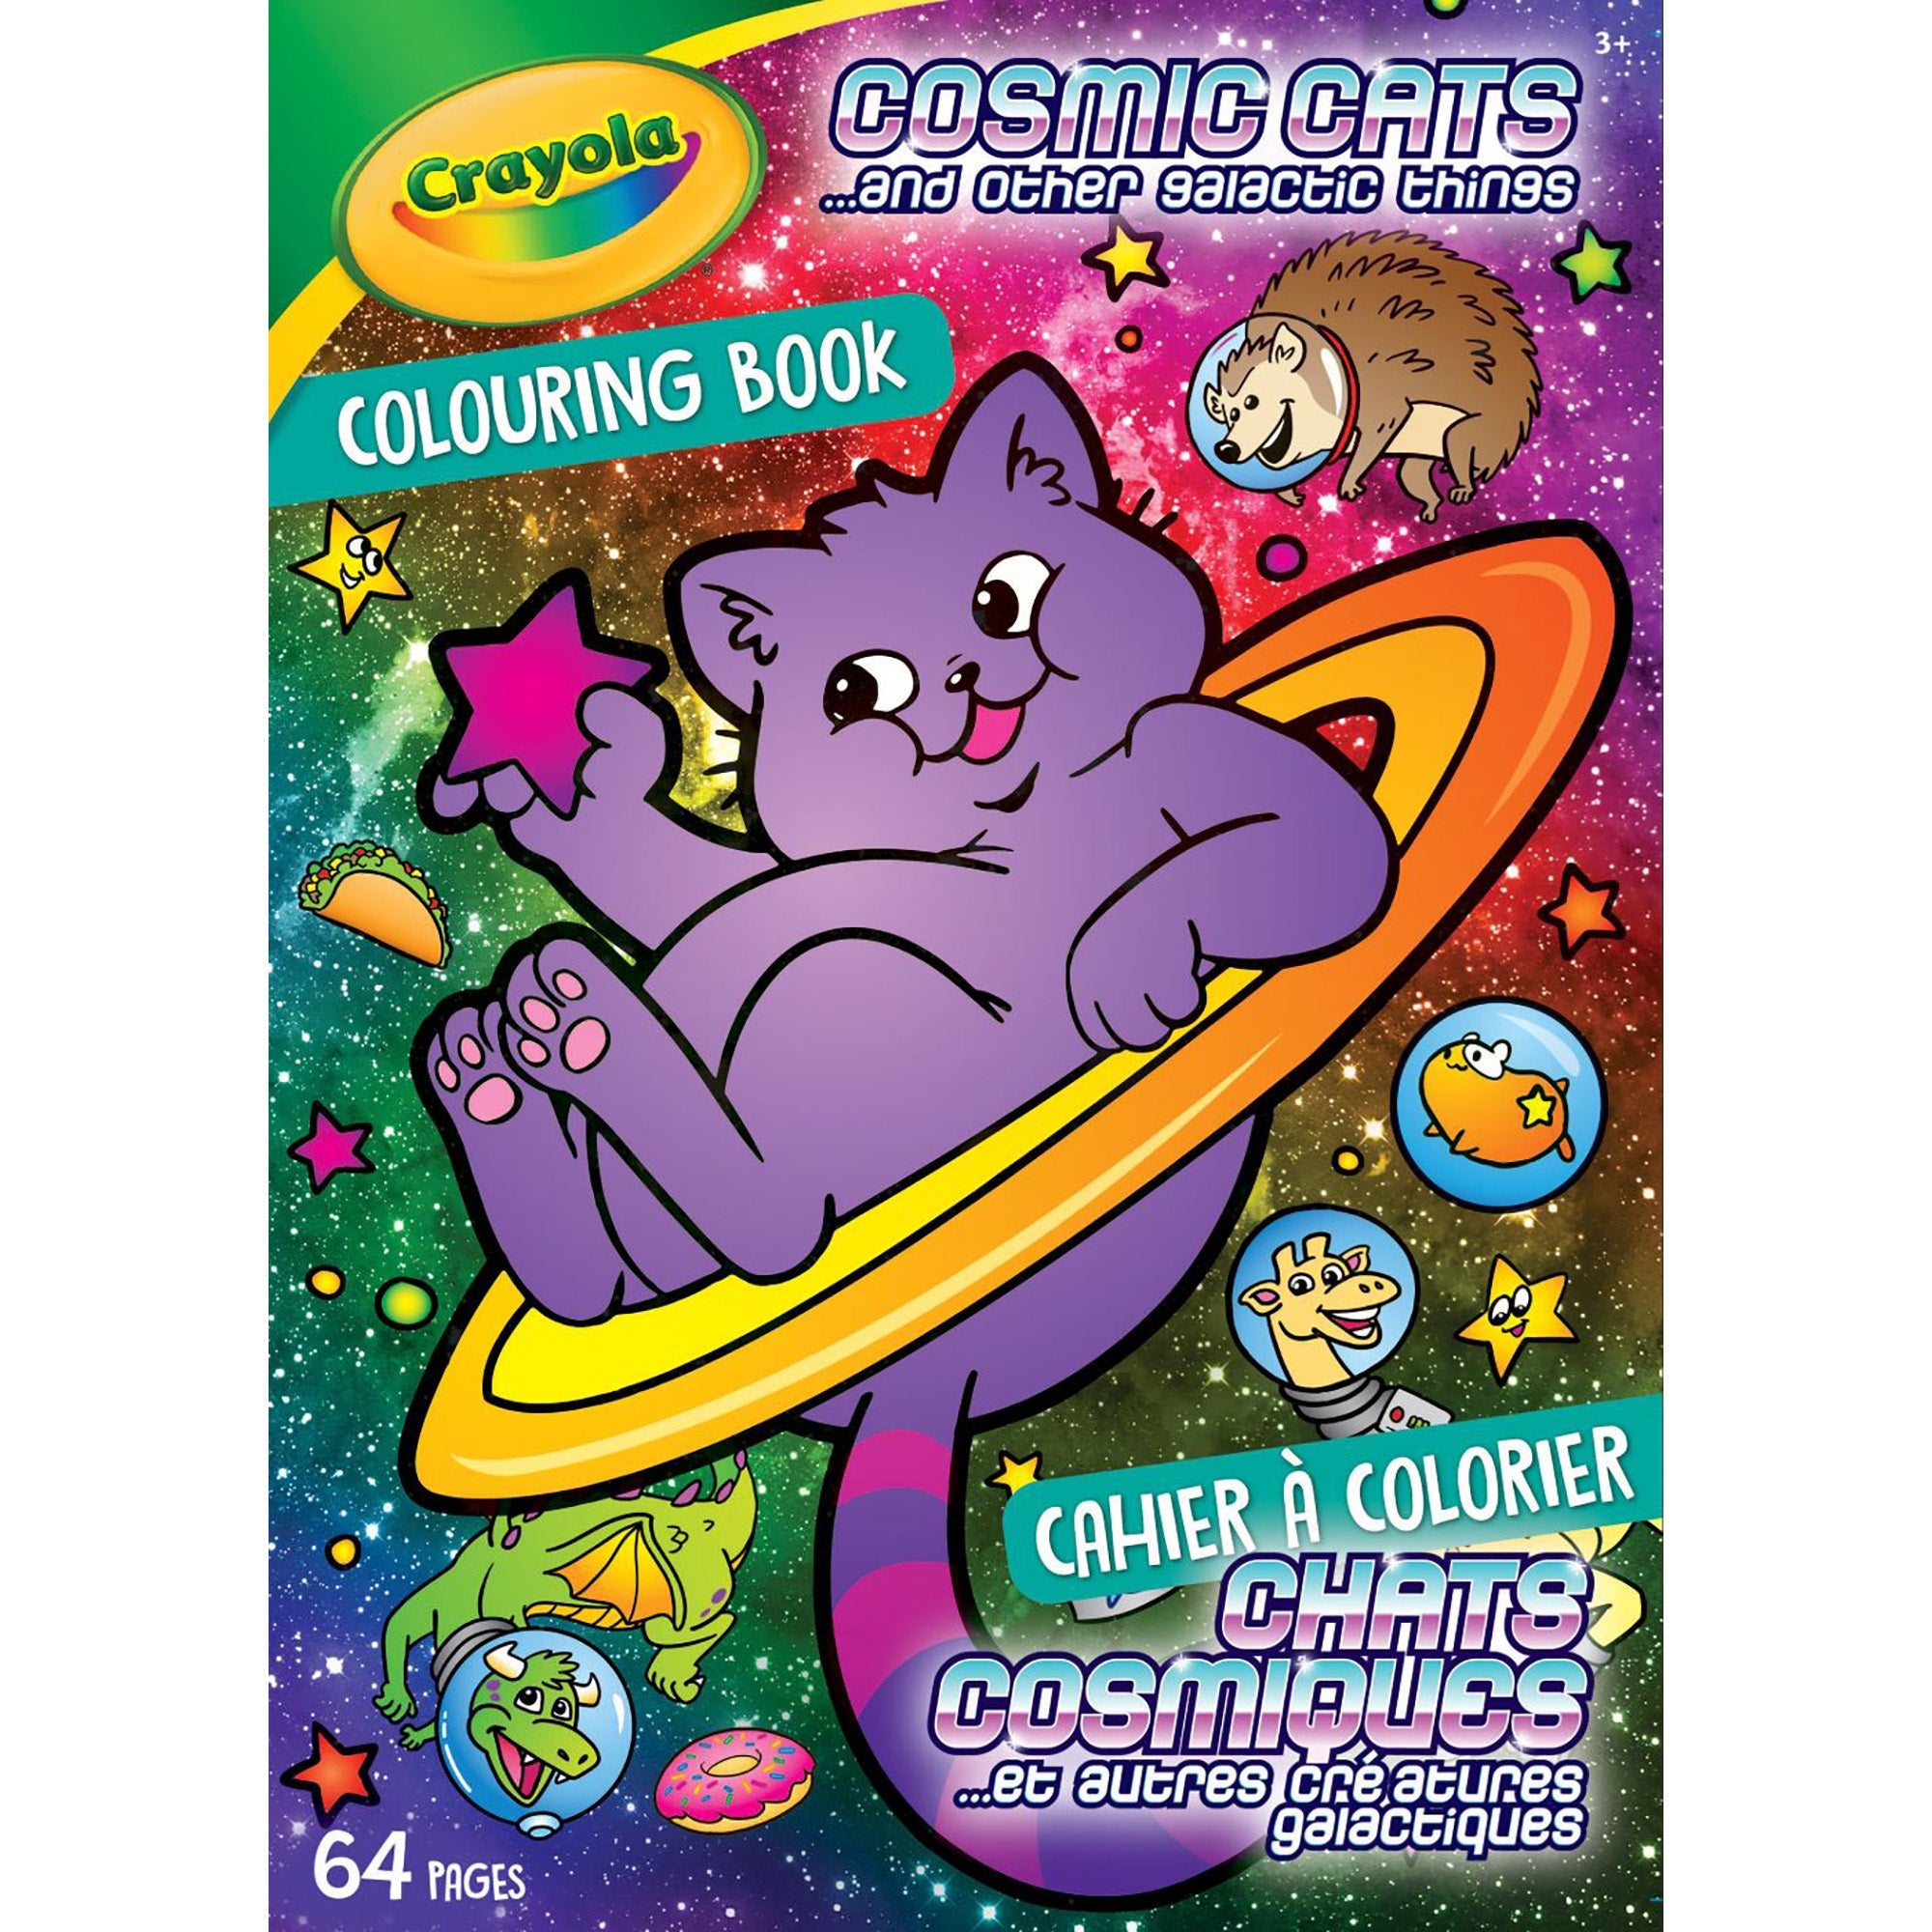 Crayola Coloring Book - 64 Pages 7.75x10.75in